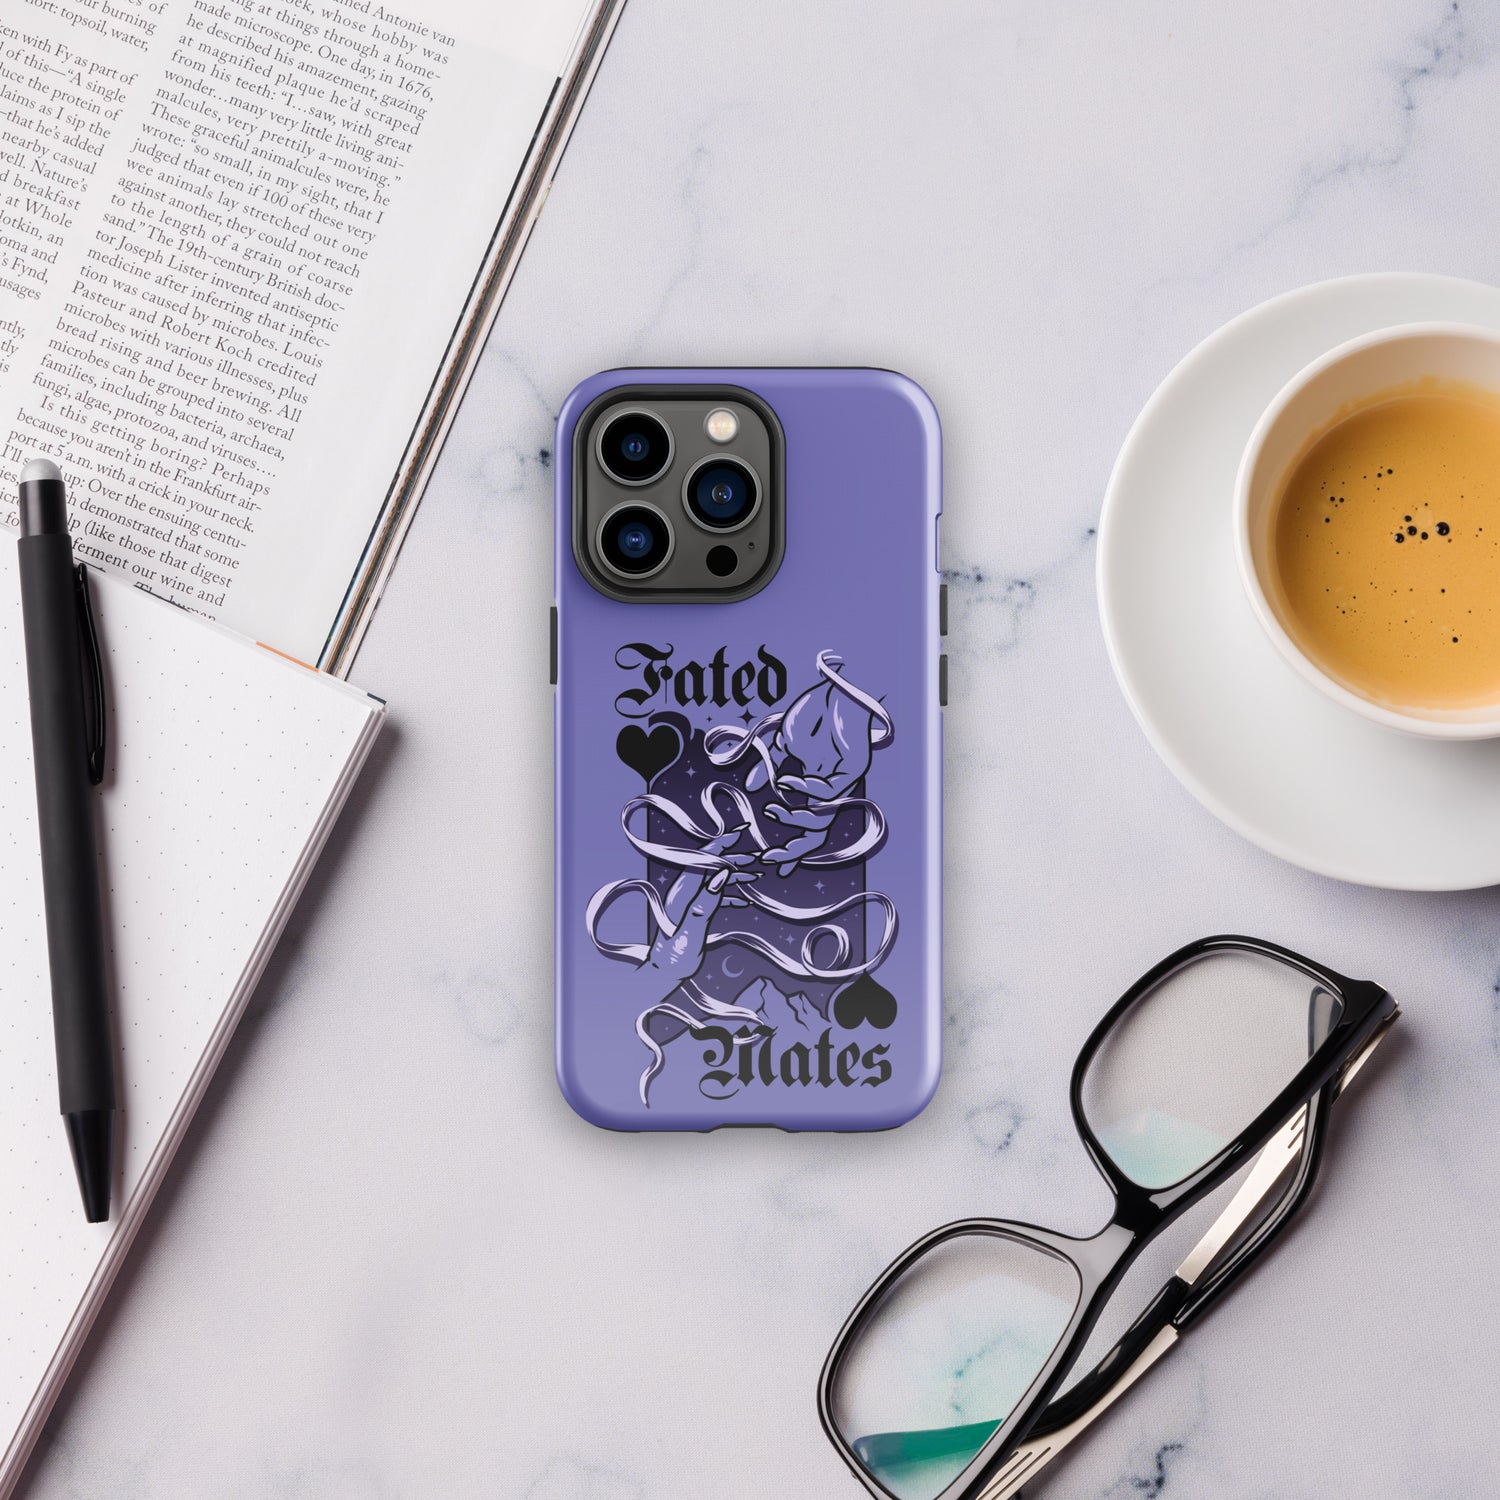 FATED MATES IPHONE CASE | TROPES MERCH